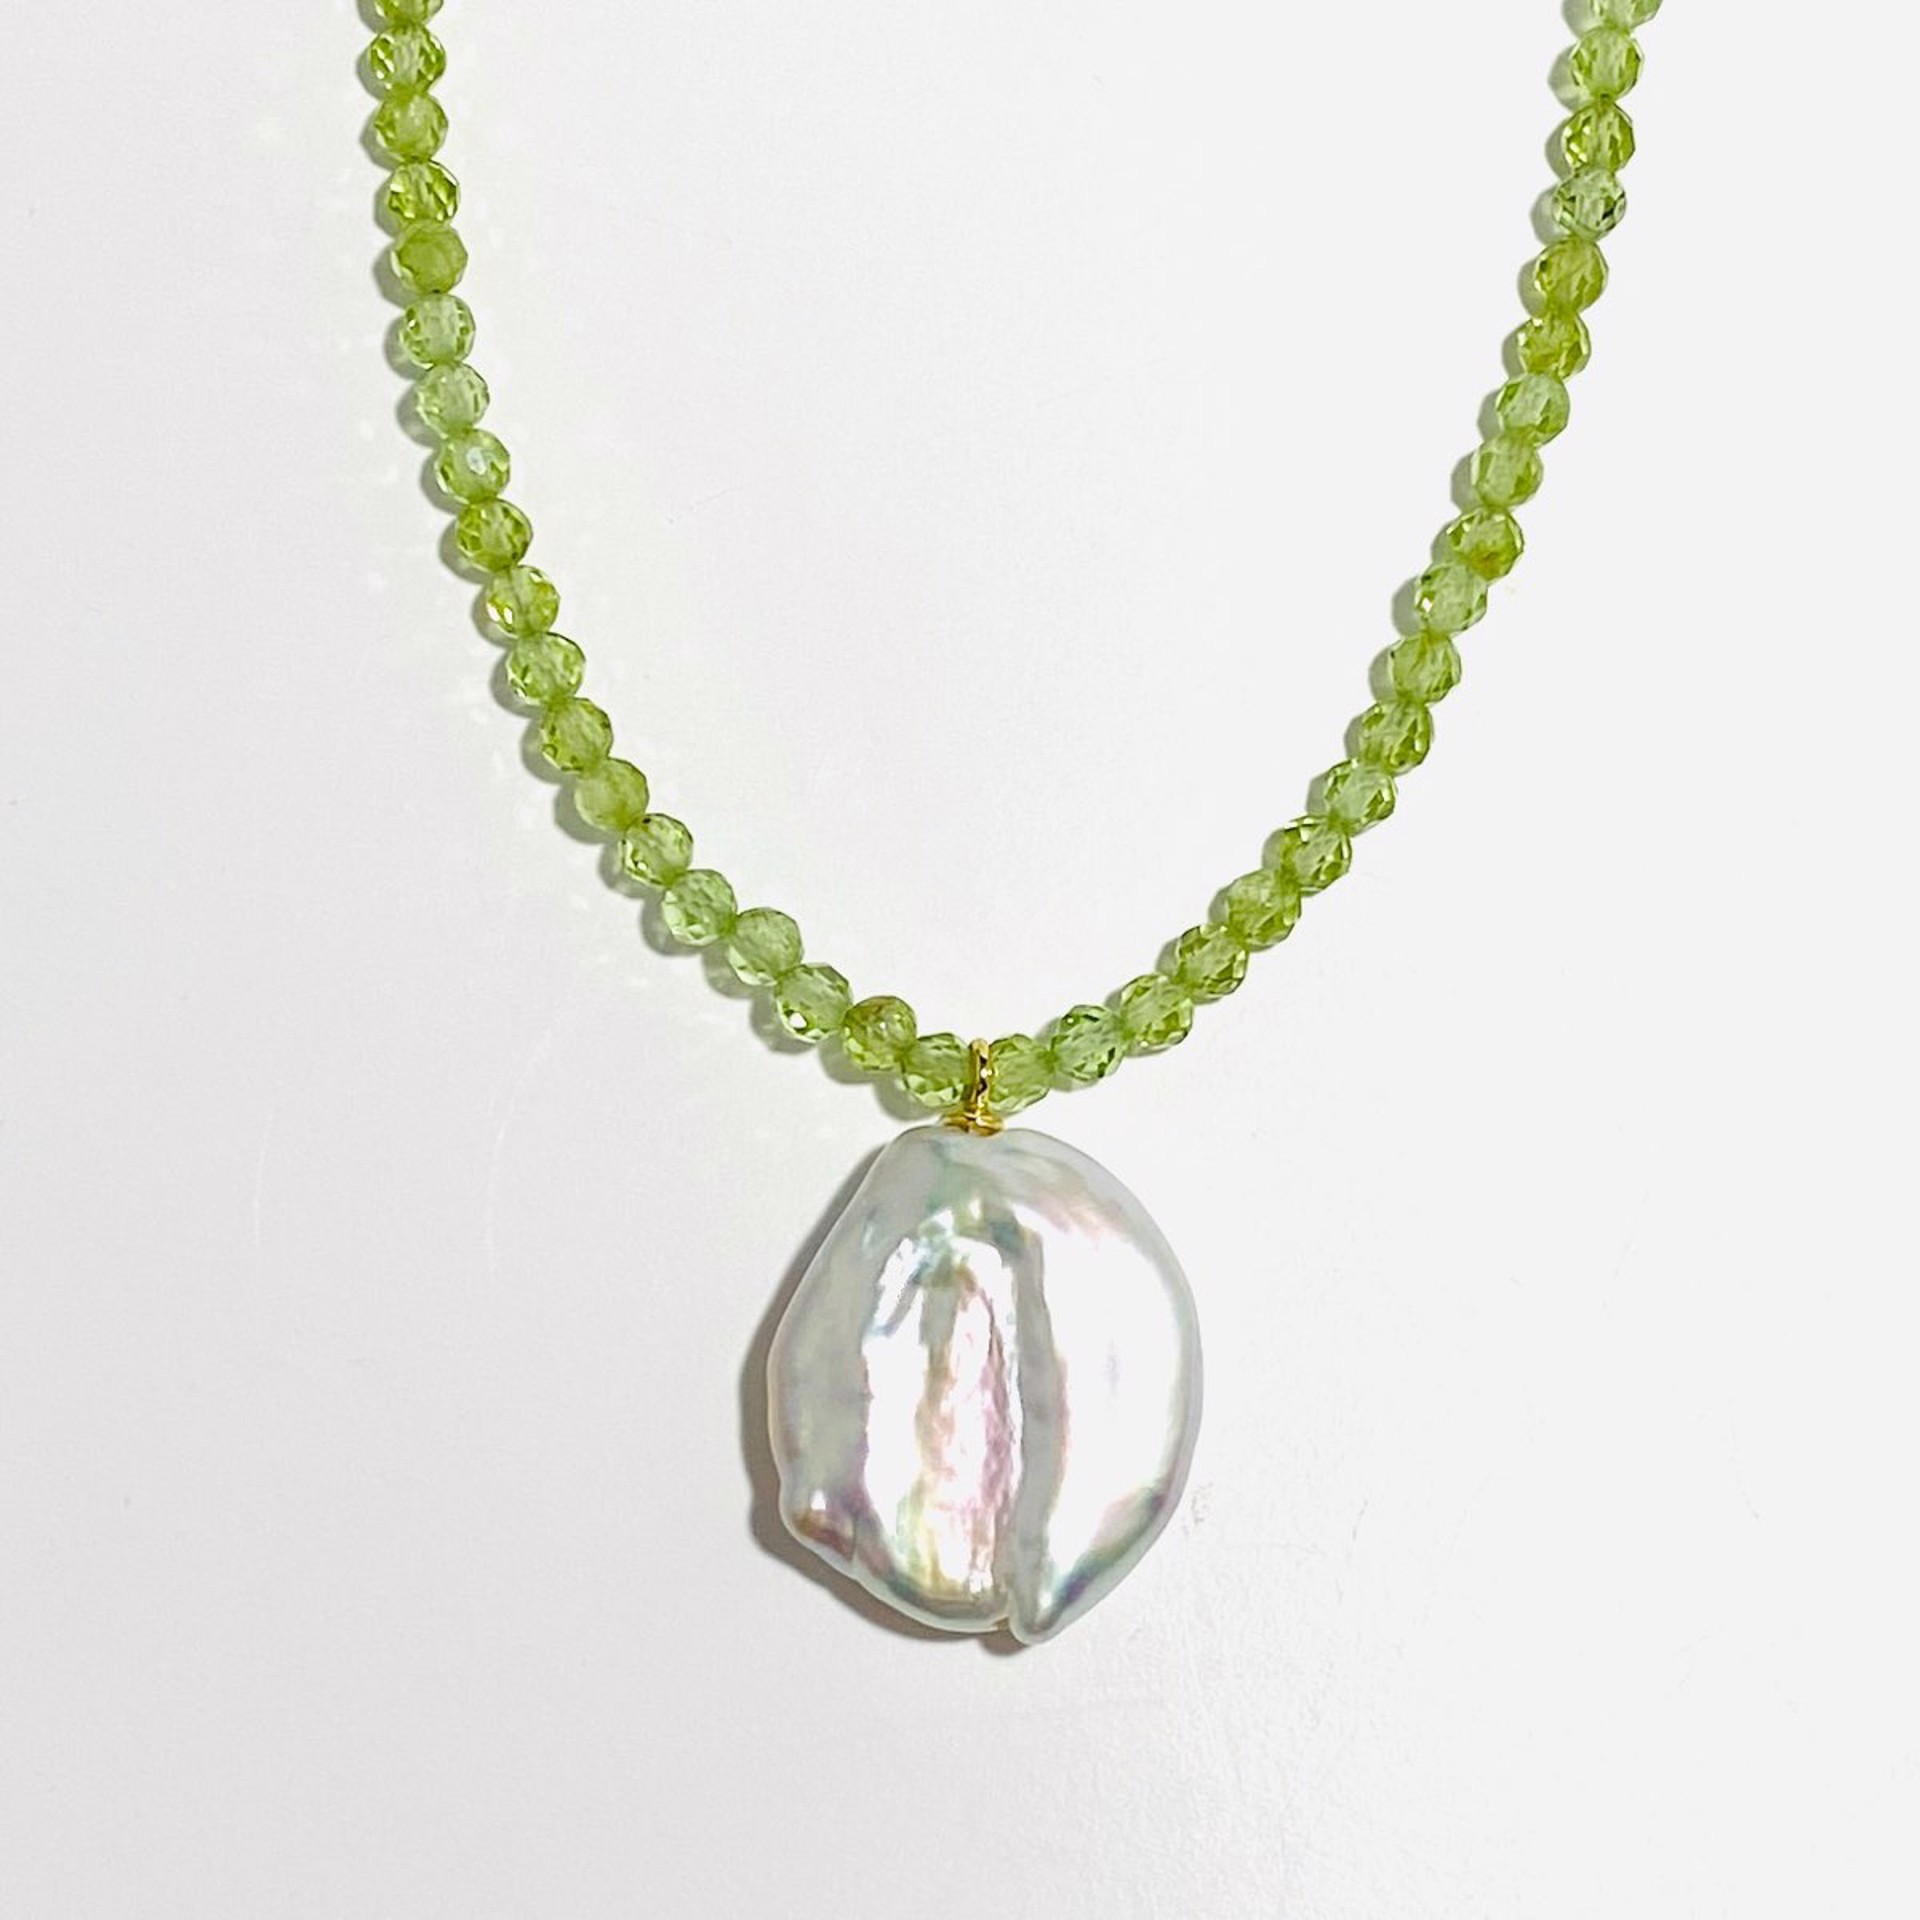 Faceted Small Peridot Coin Pearl Drop Necklace by Nance Trueworthy